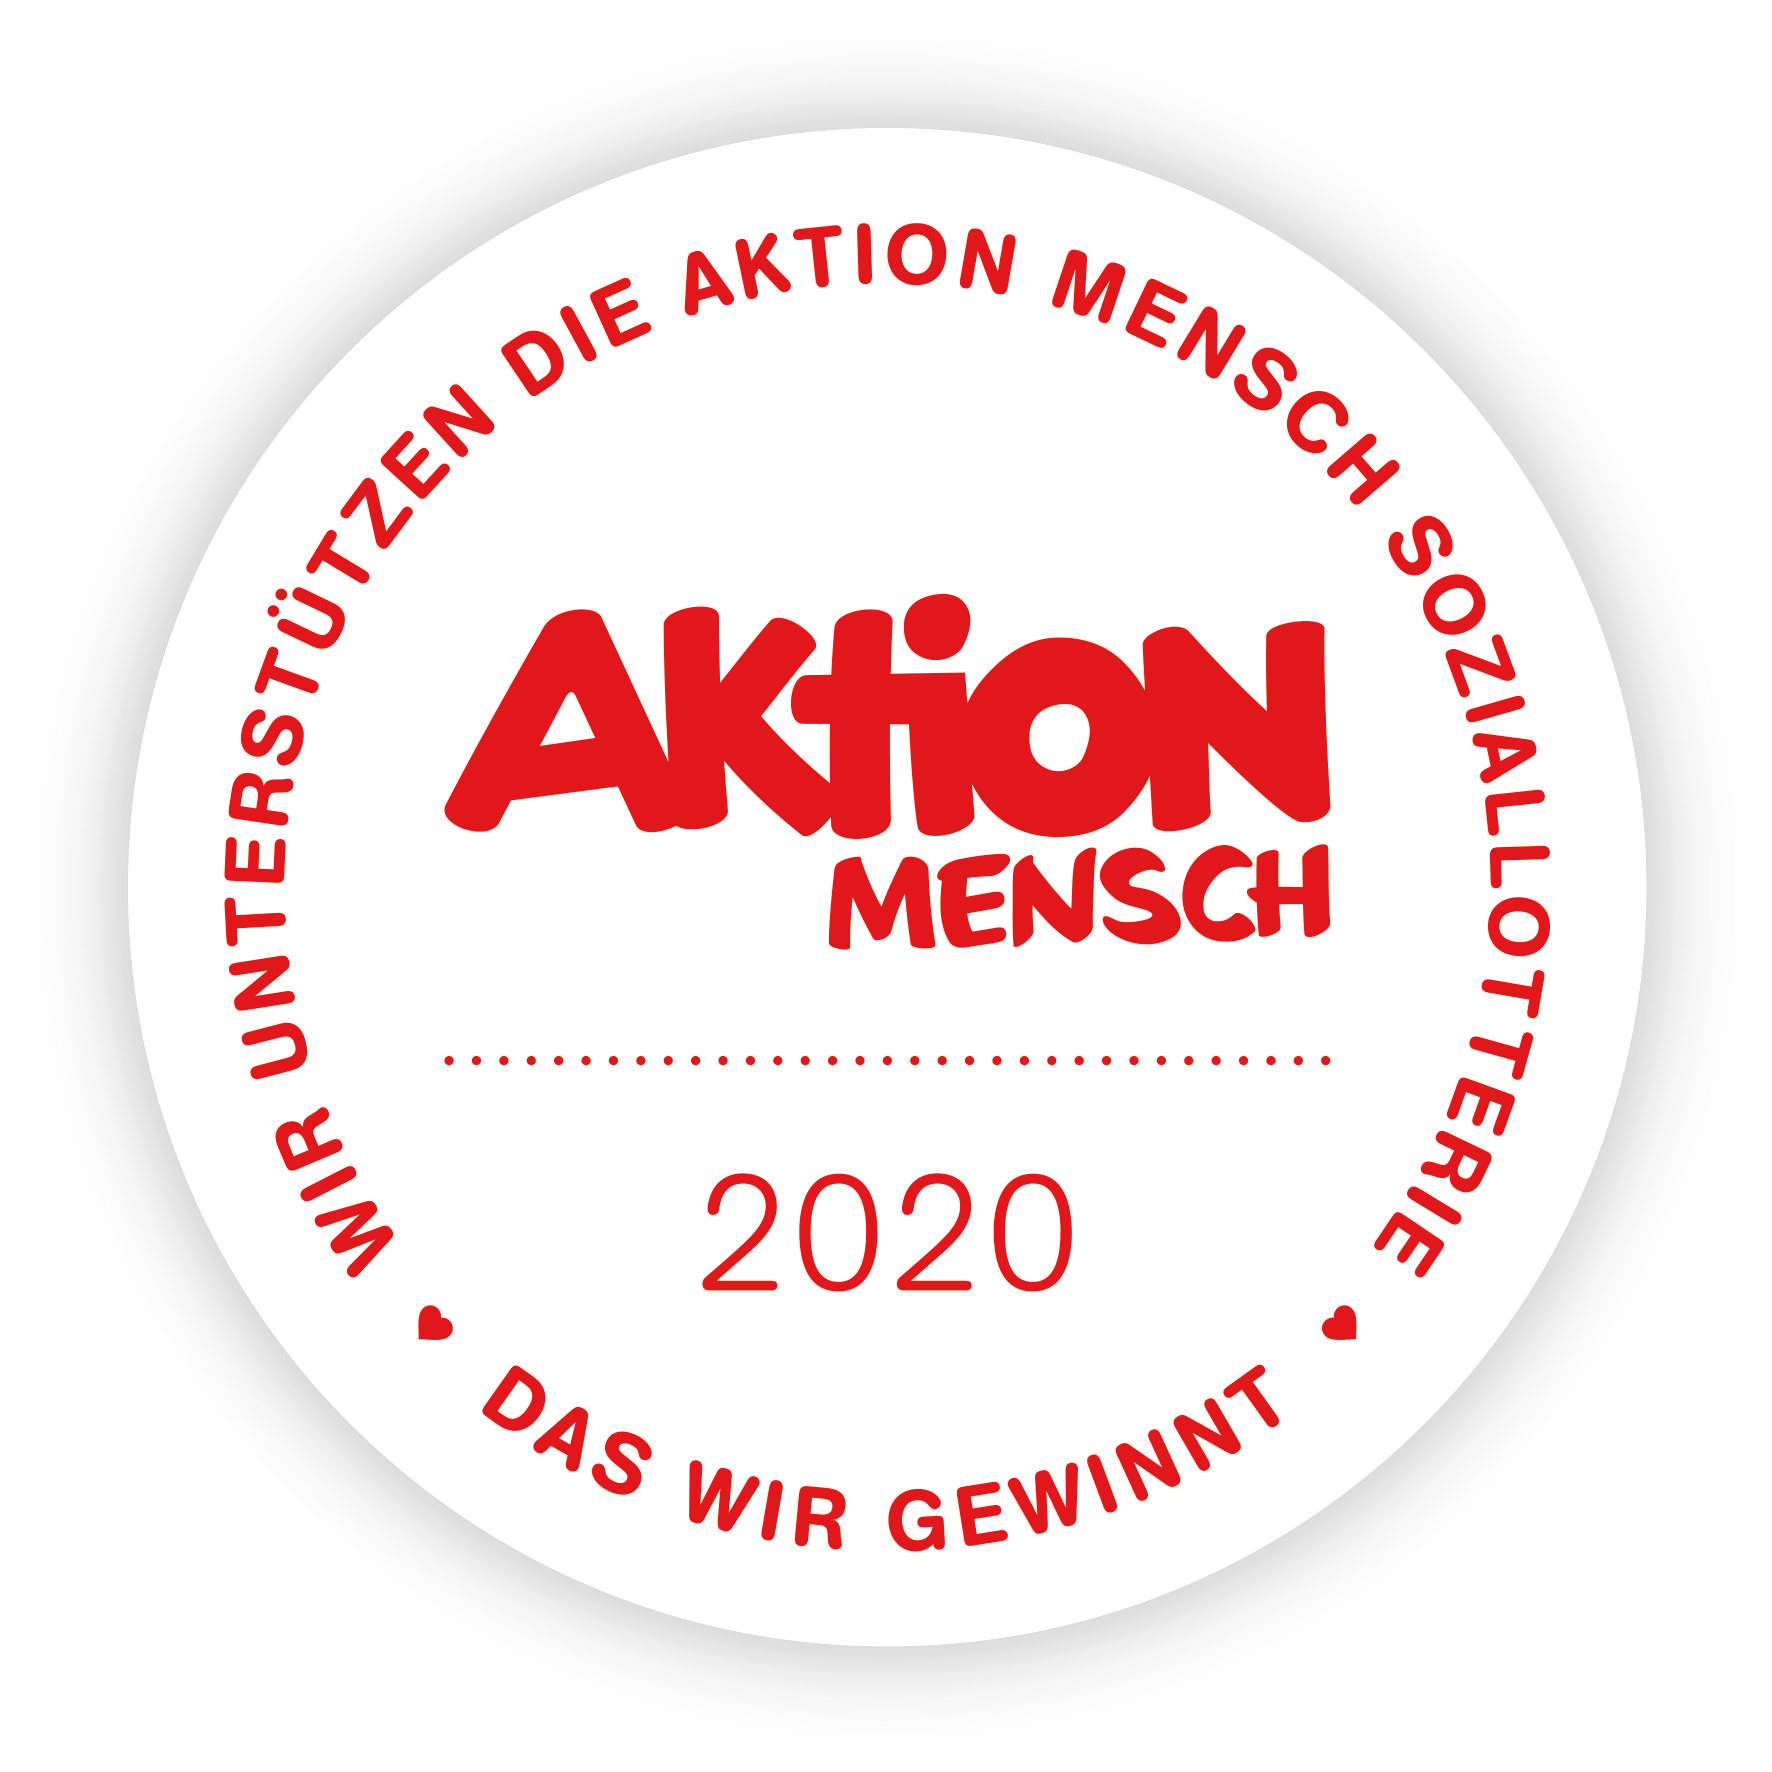 We support the “Aktion mensch project“